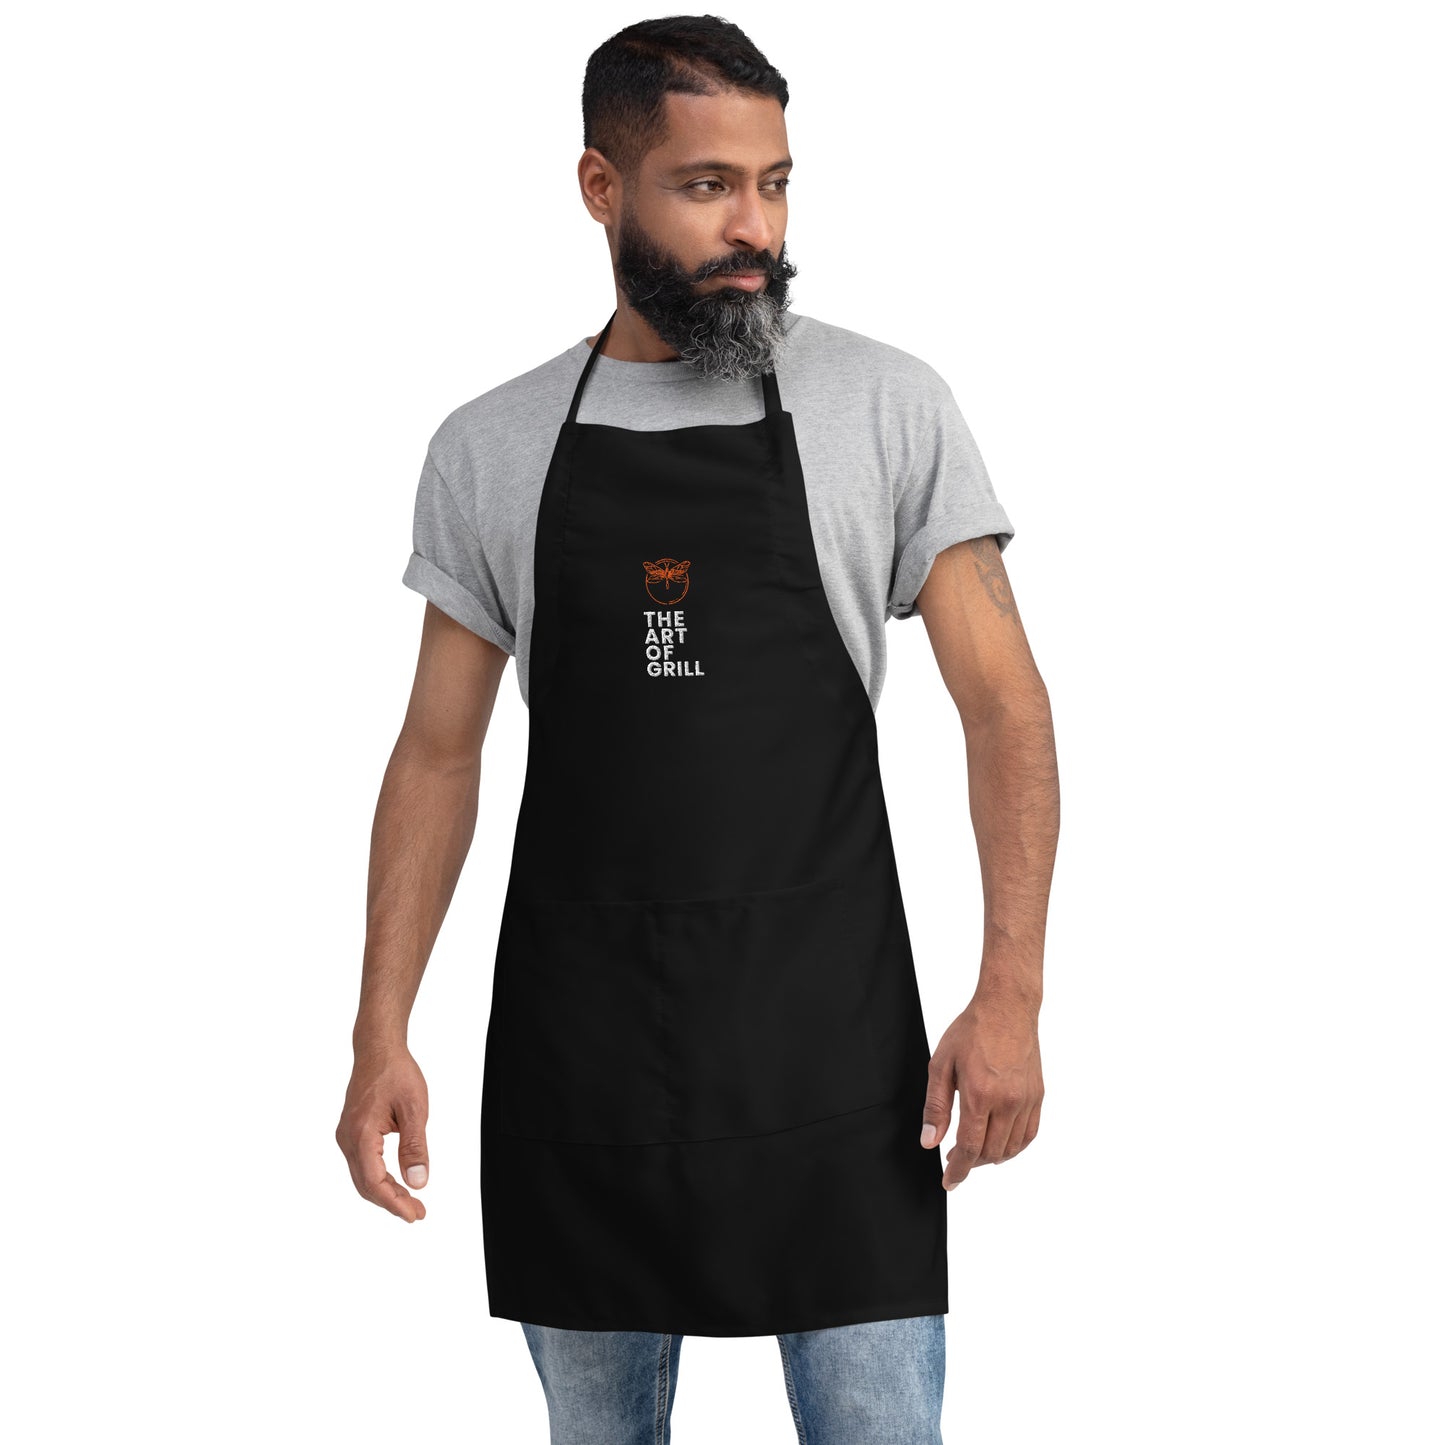 Art of GRILL Embroidered Apron